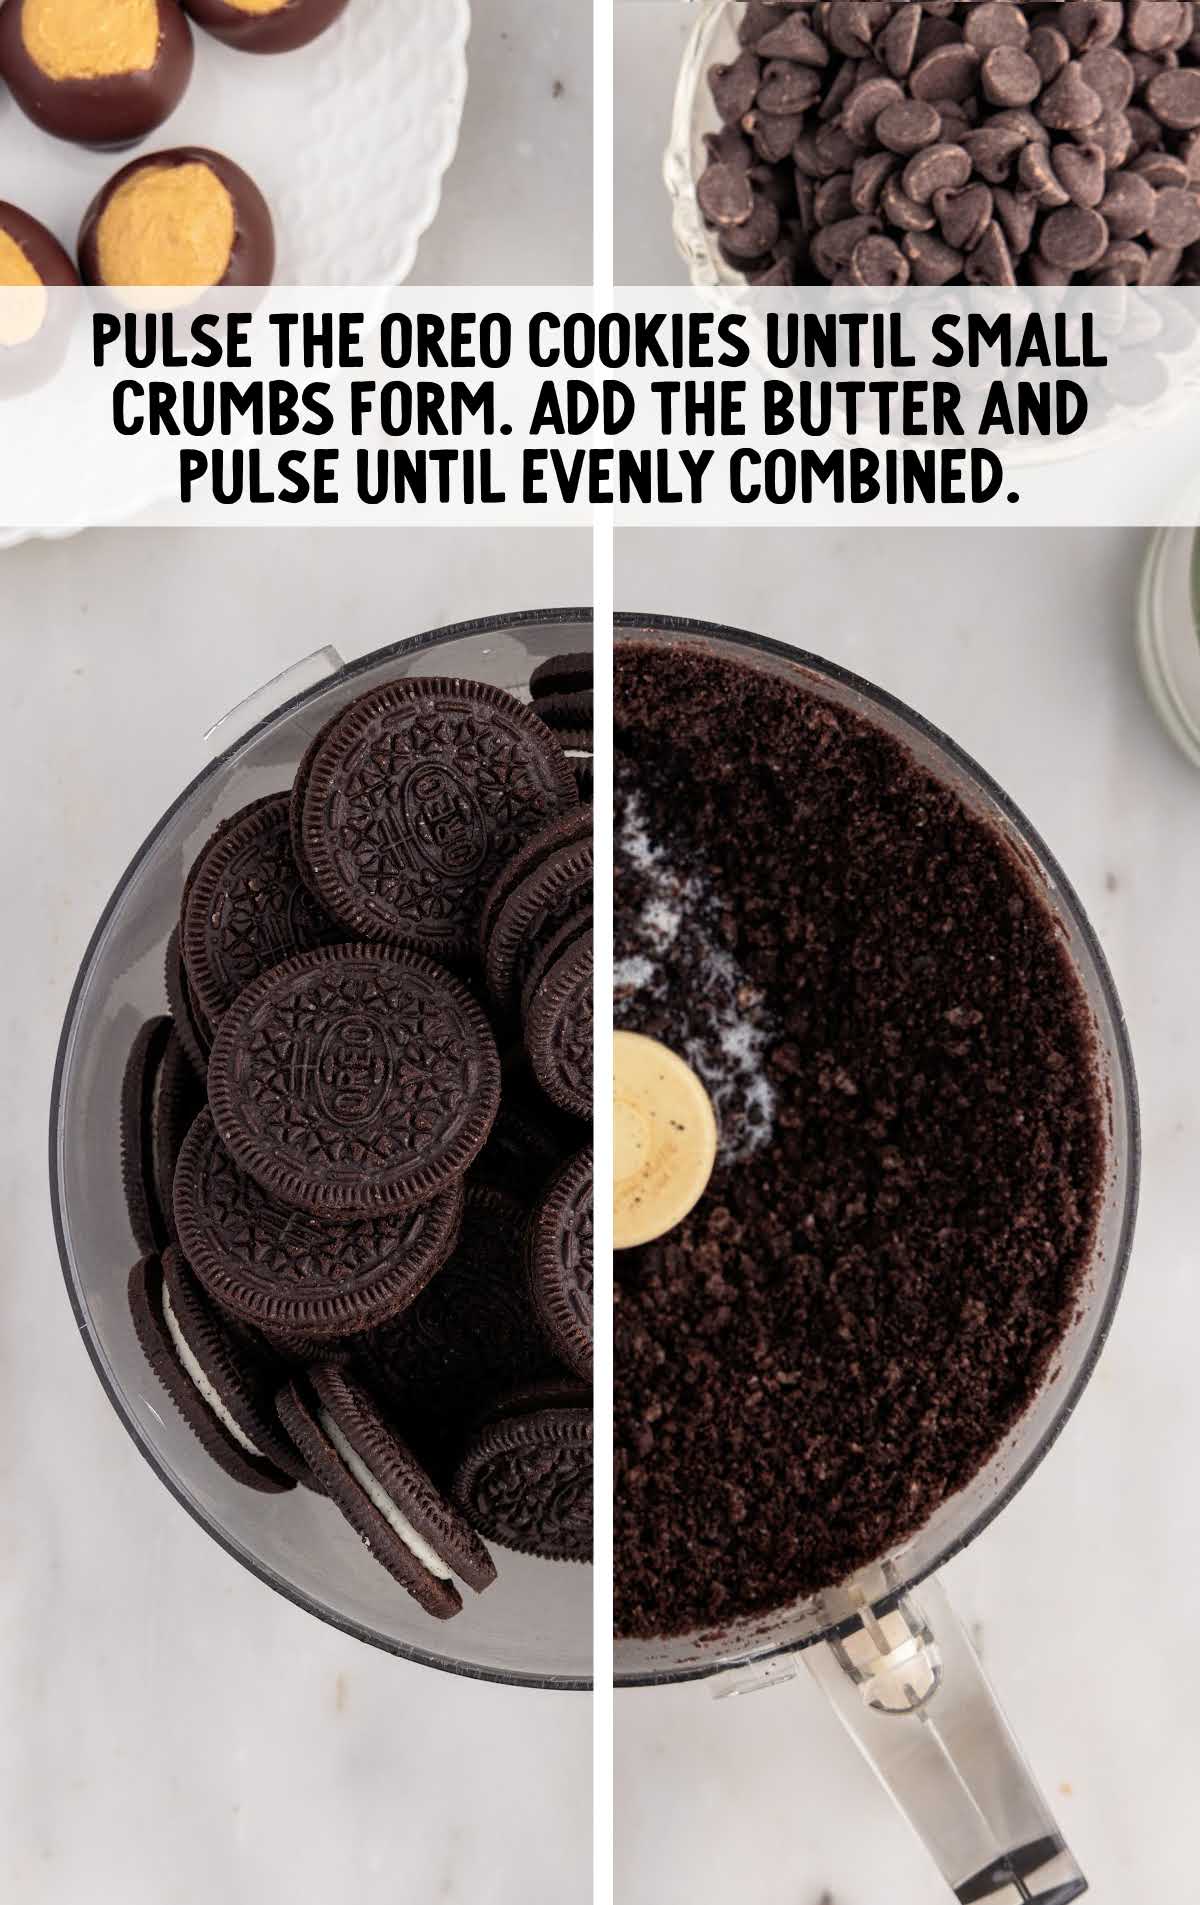 oreo cookies pulsed until small crumbs form